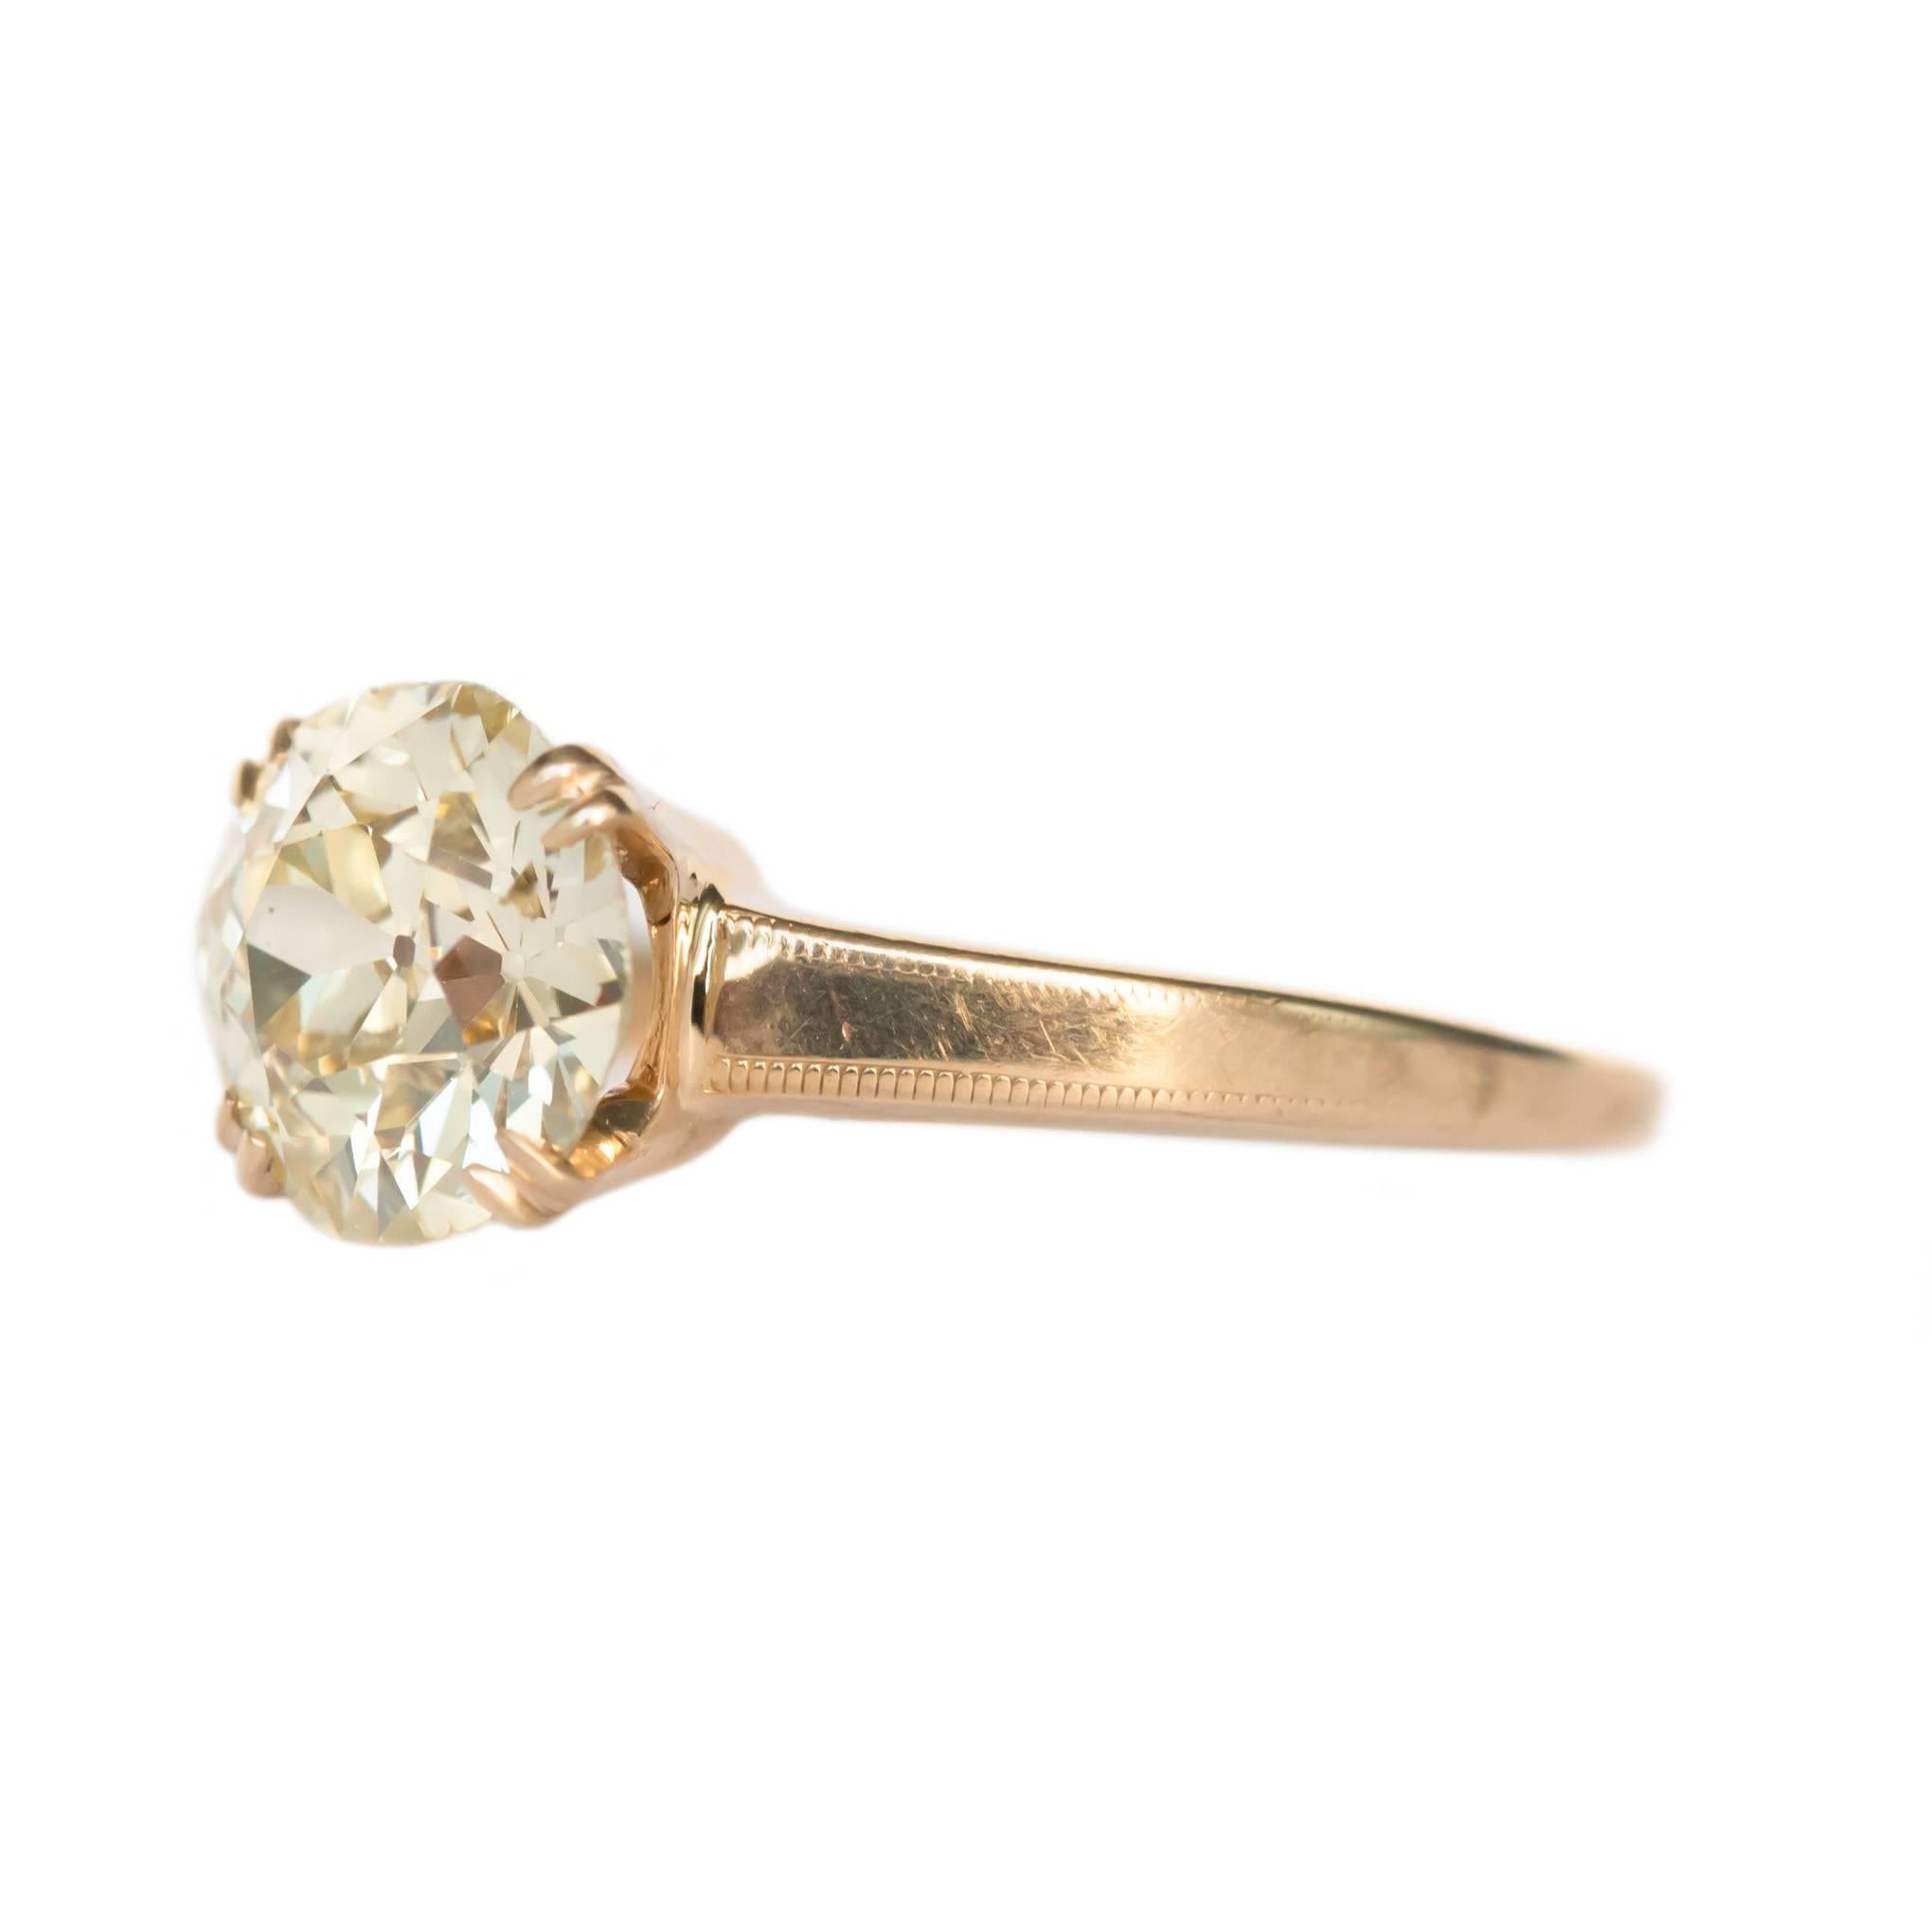 Item Details: 
Ring Size: 5.5
Metal Type: 14 Karat Yellow Gold
Weight: 1.8 grams

Center Diamond Details:
Shape: Old European Cut 
Carat Weight: 1.55 carat
Color: O-P
Clarity: VS2

Finger to Top of Stone Measurement: 5.92mm